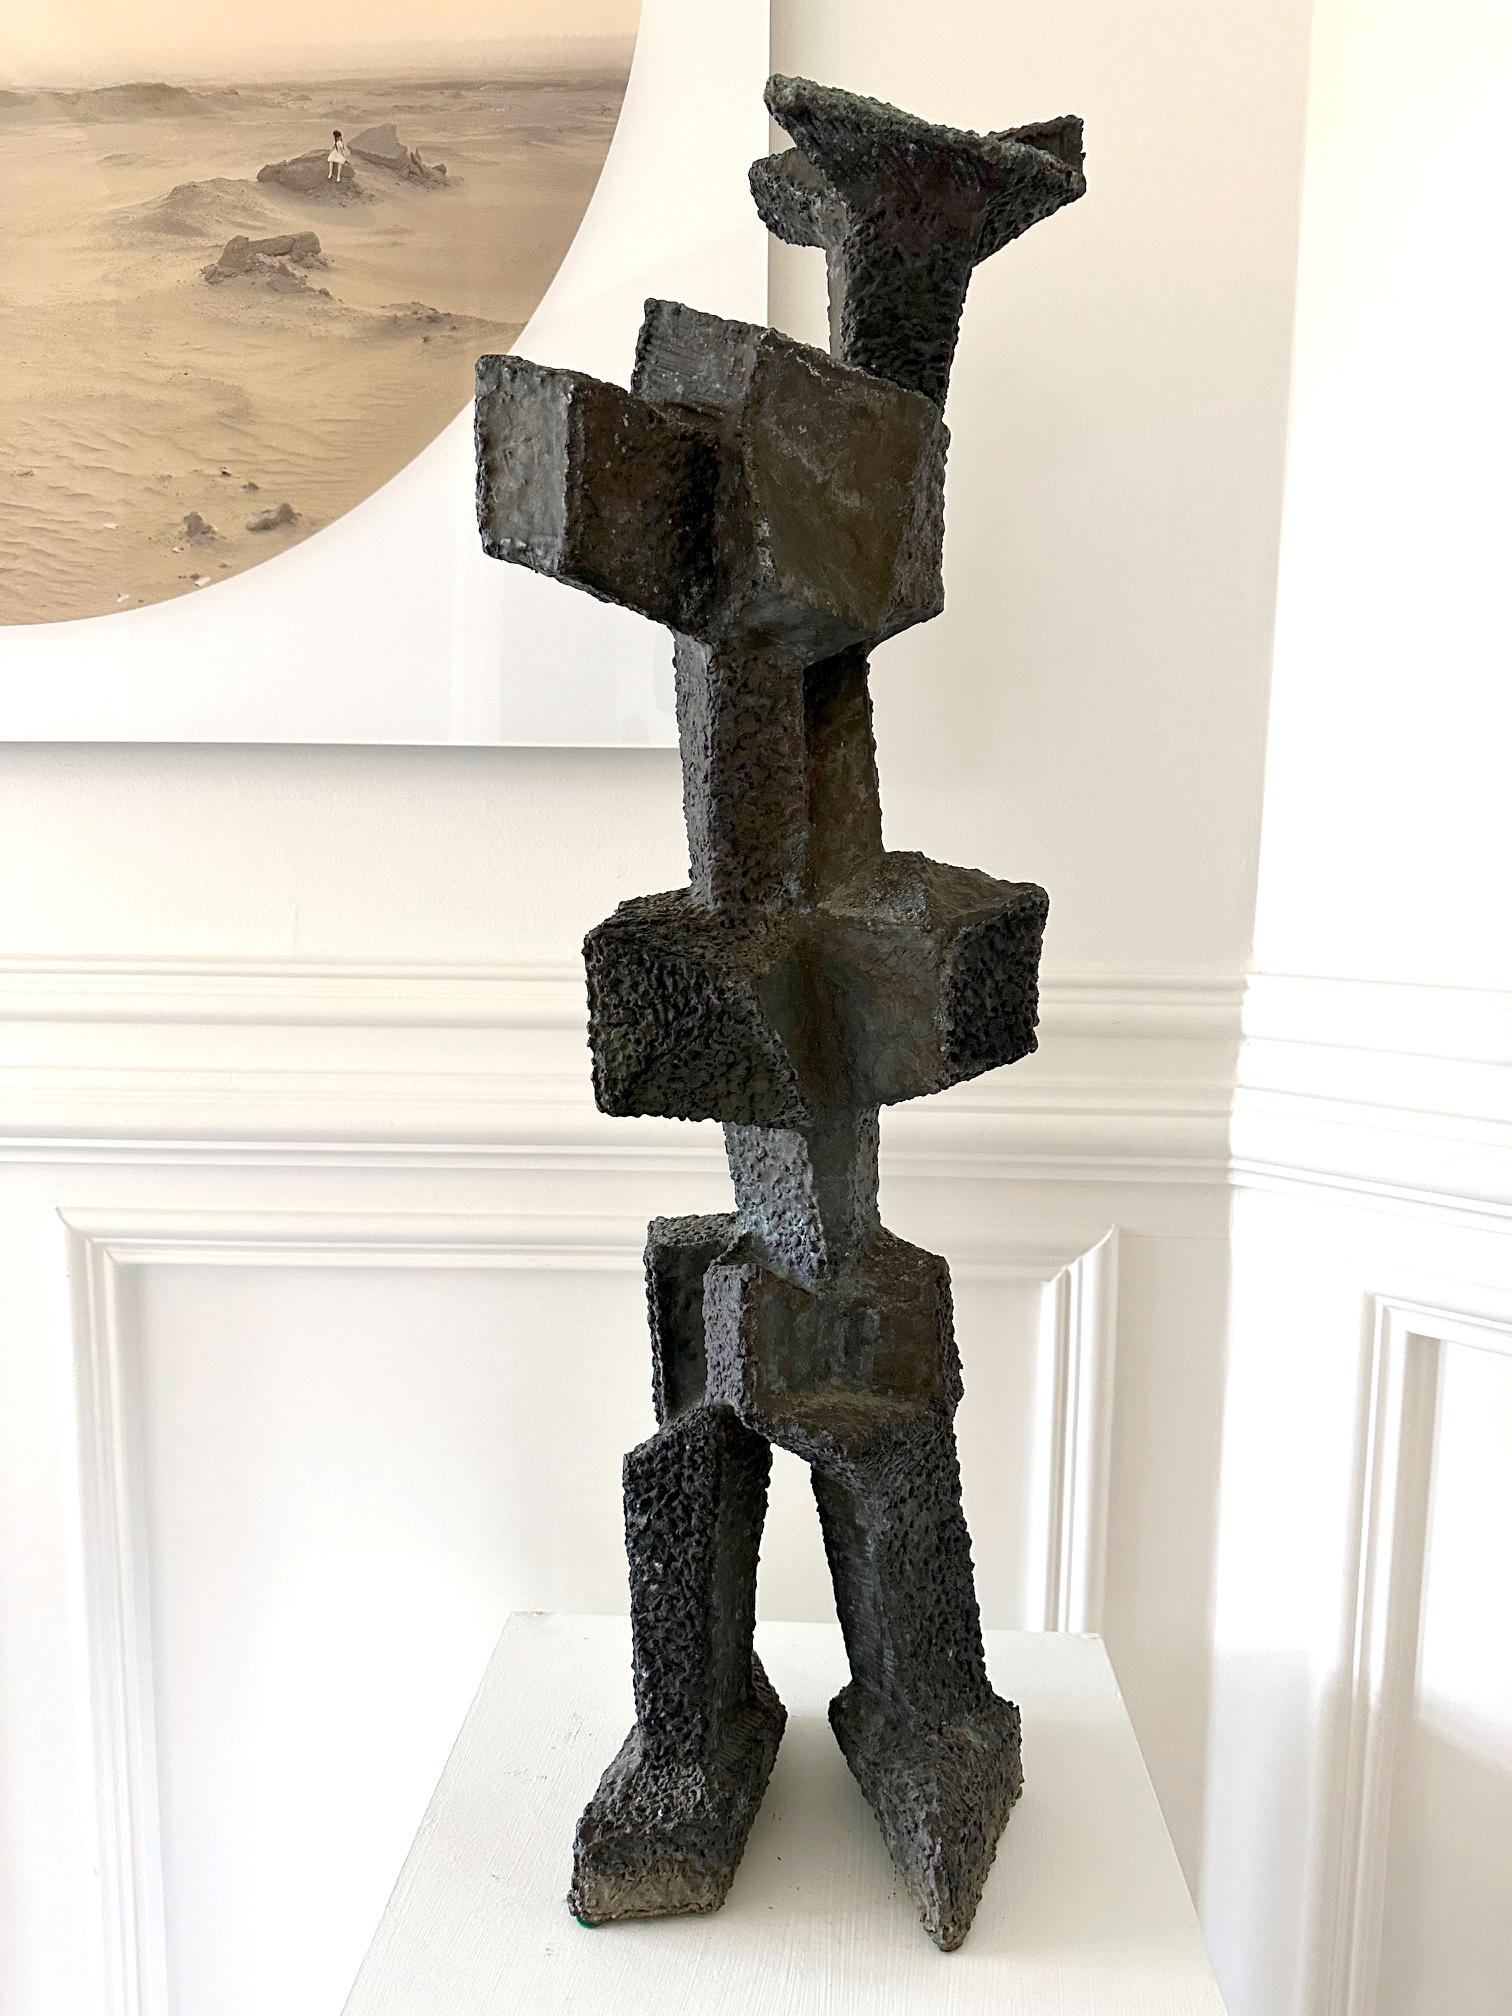 A unique bronze sculpture circa 1960s by Harry Bertoia (1915-1978), the celebrated Italian-born American artist, sculptor, and designer. The welded and patinated bronze sculpture is in an abstract standing figurative form, rarely seen in the